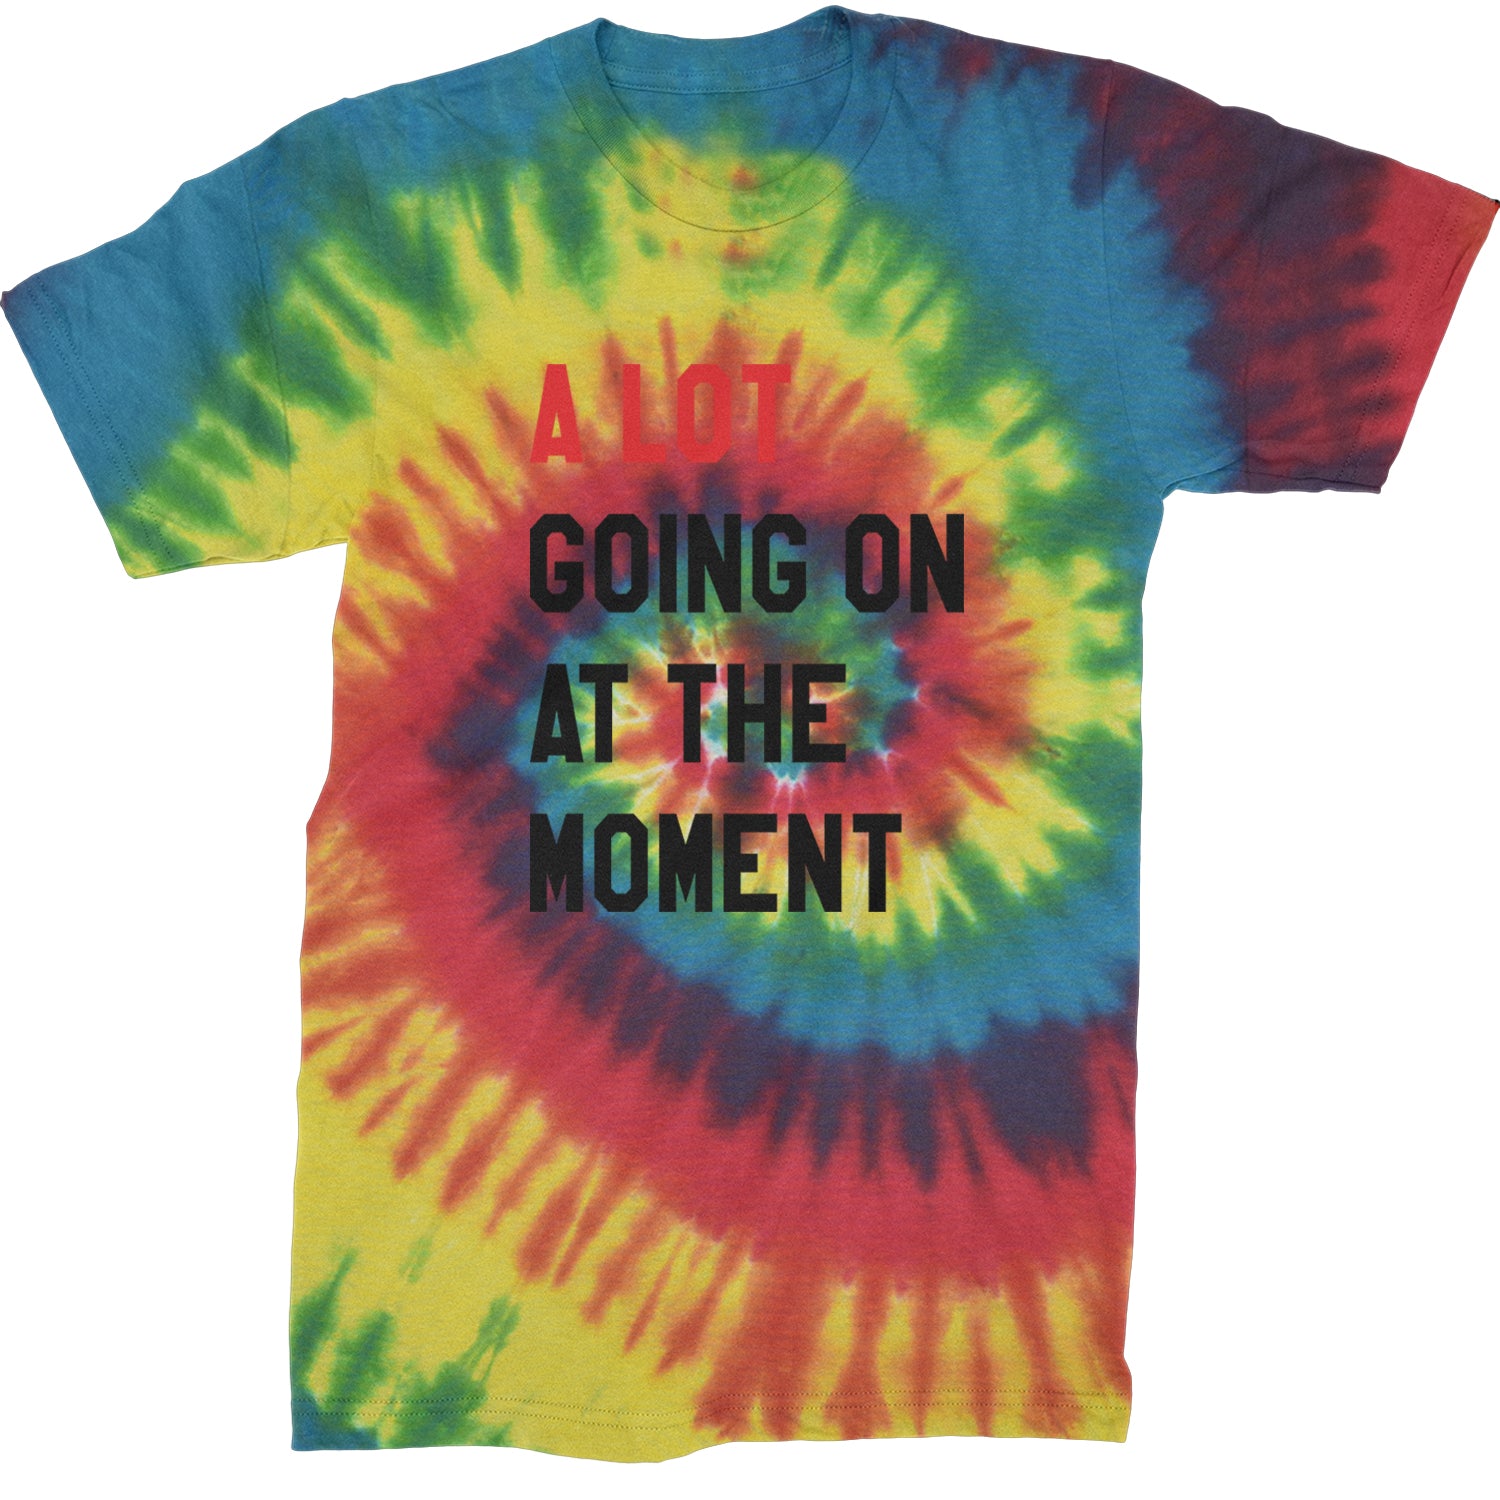 A Lot Going On At The Moment New TTPD Poet Department Mens T-shirt Tie-Dye Rainbow Reactive